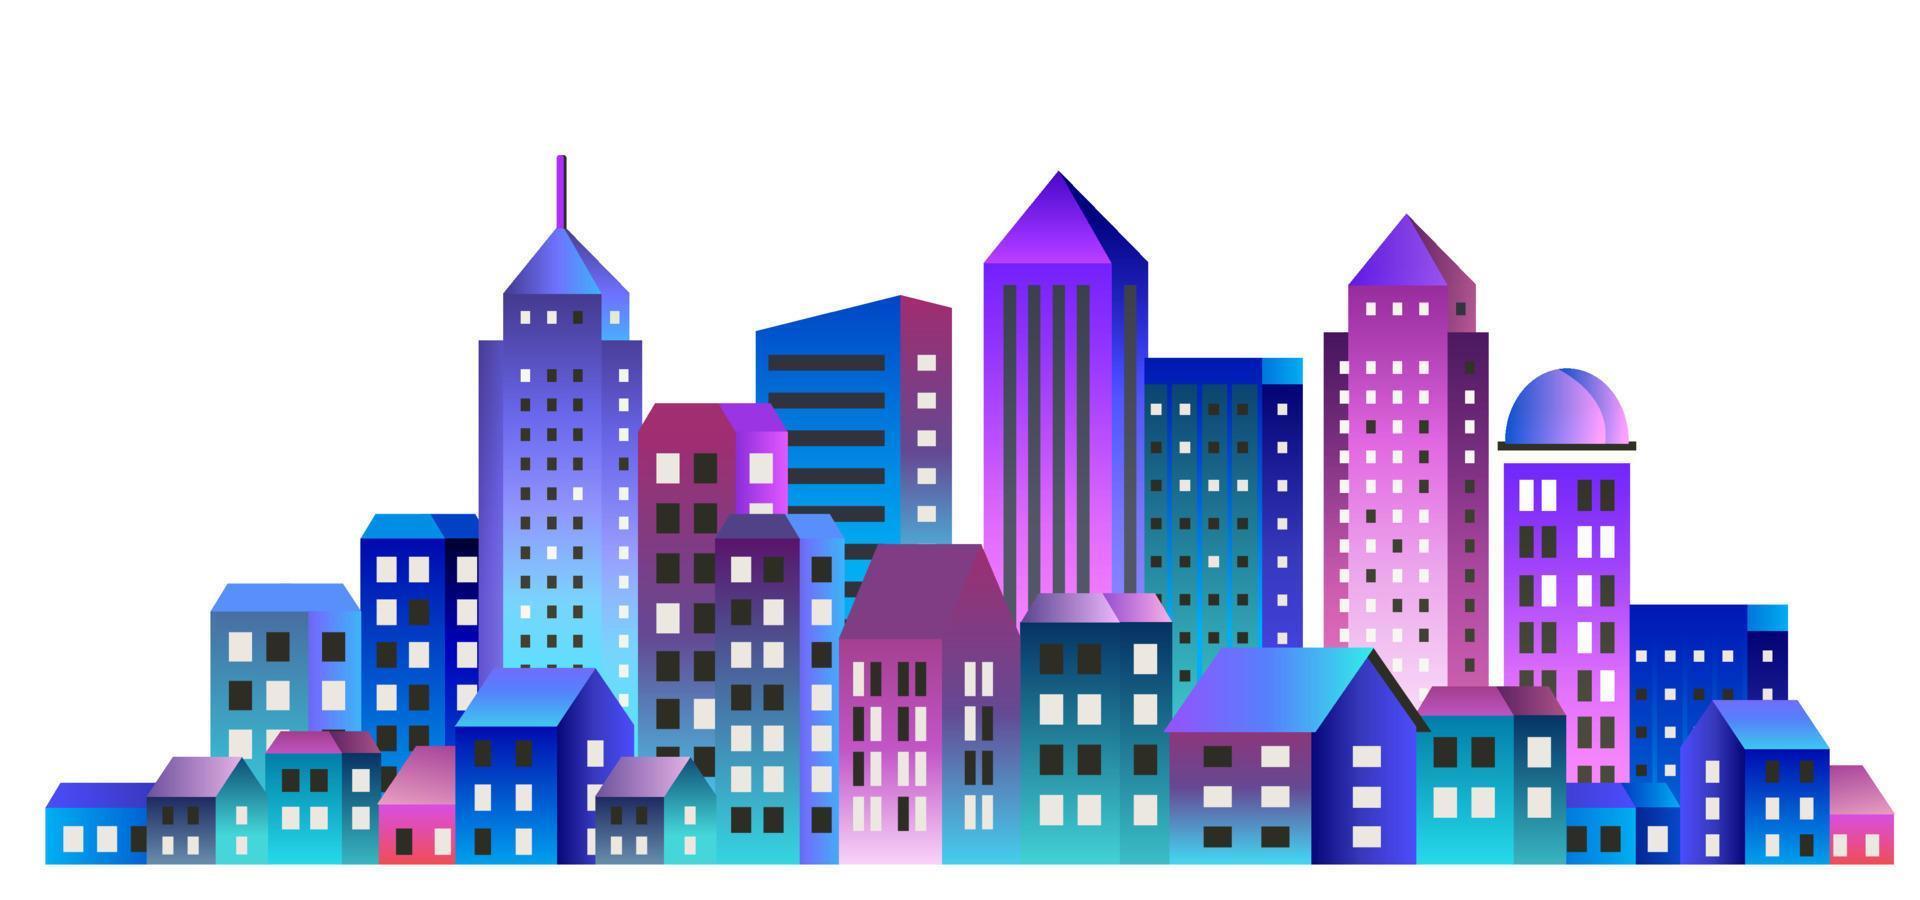 Silhouette of city structure downtown urban modern street of architecture with a building, tower, skyscraper. Cityscape skyline landscape background for business concept illustration vector